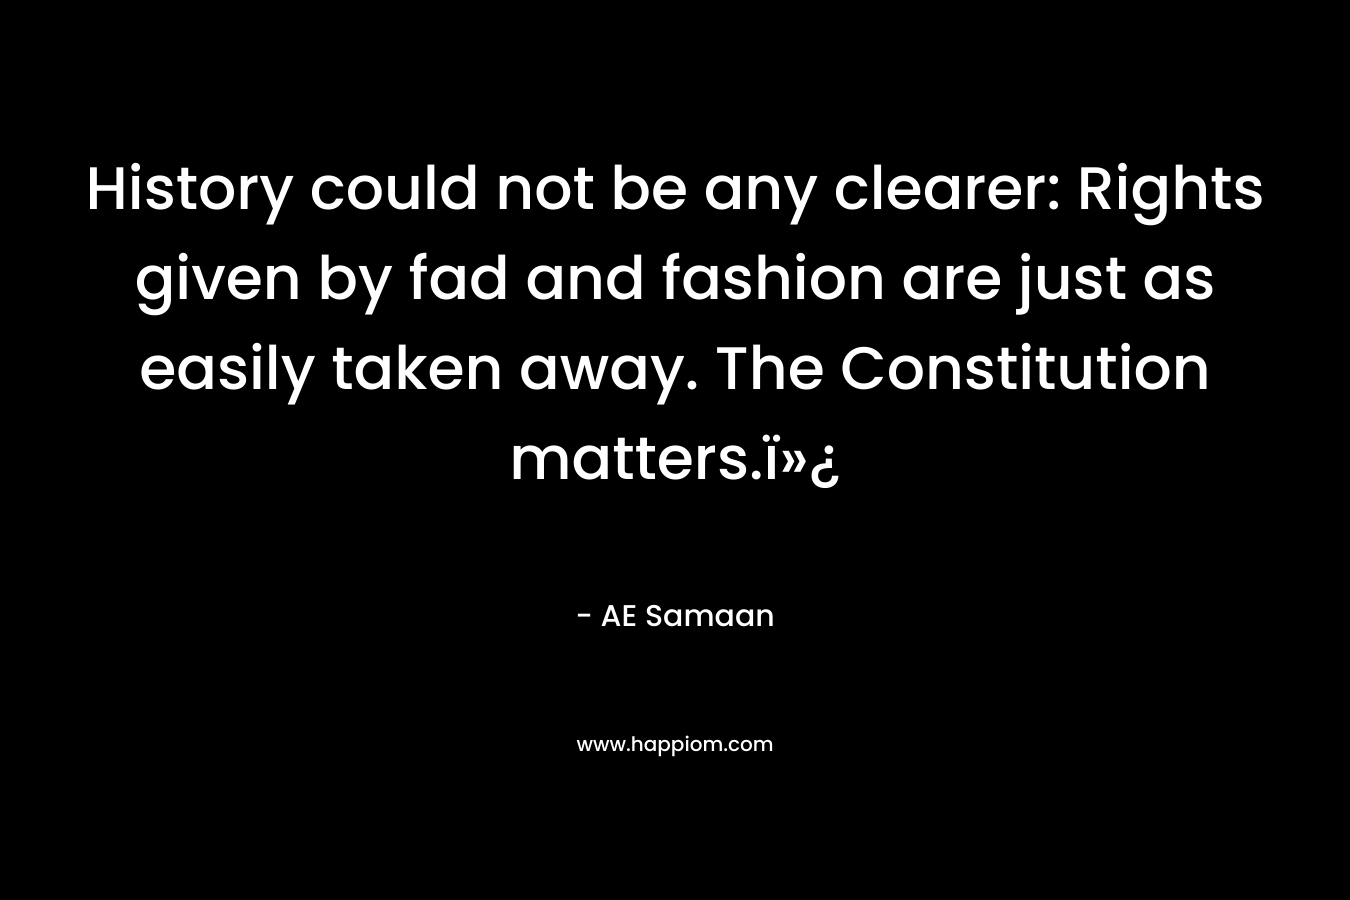 History could not be any clearer: Rights given by fad and fashion are just as easily taken away. The Constitution matters.ï»¿ – AE Samaan